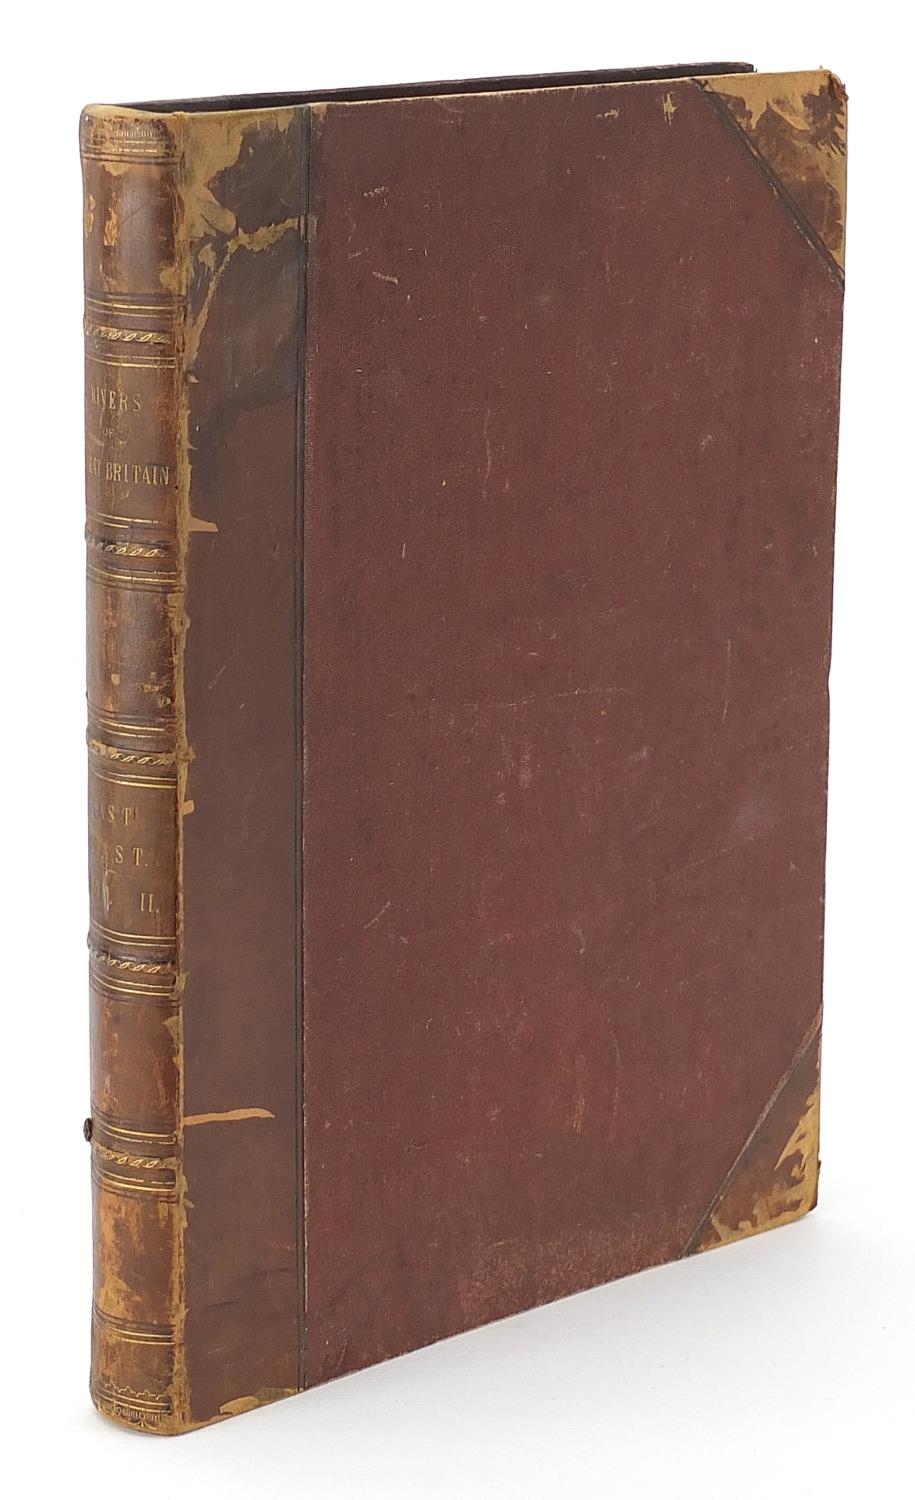 Rivers of Great Britain, Rivers of the East Coast, hardback book published Cassell & Company 1892